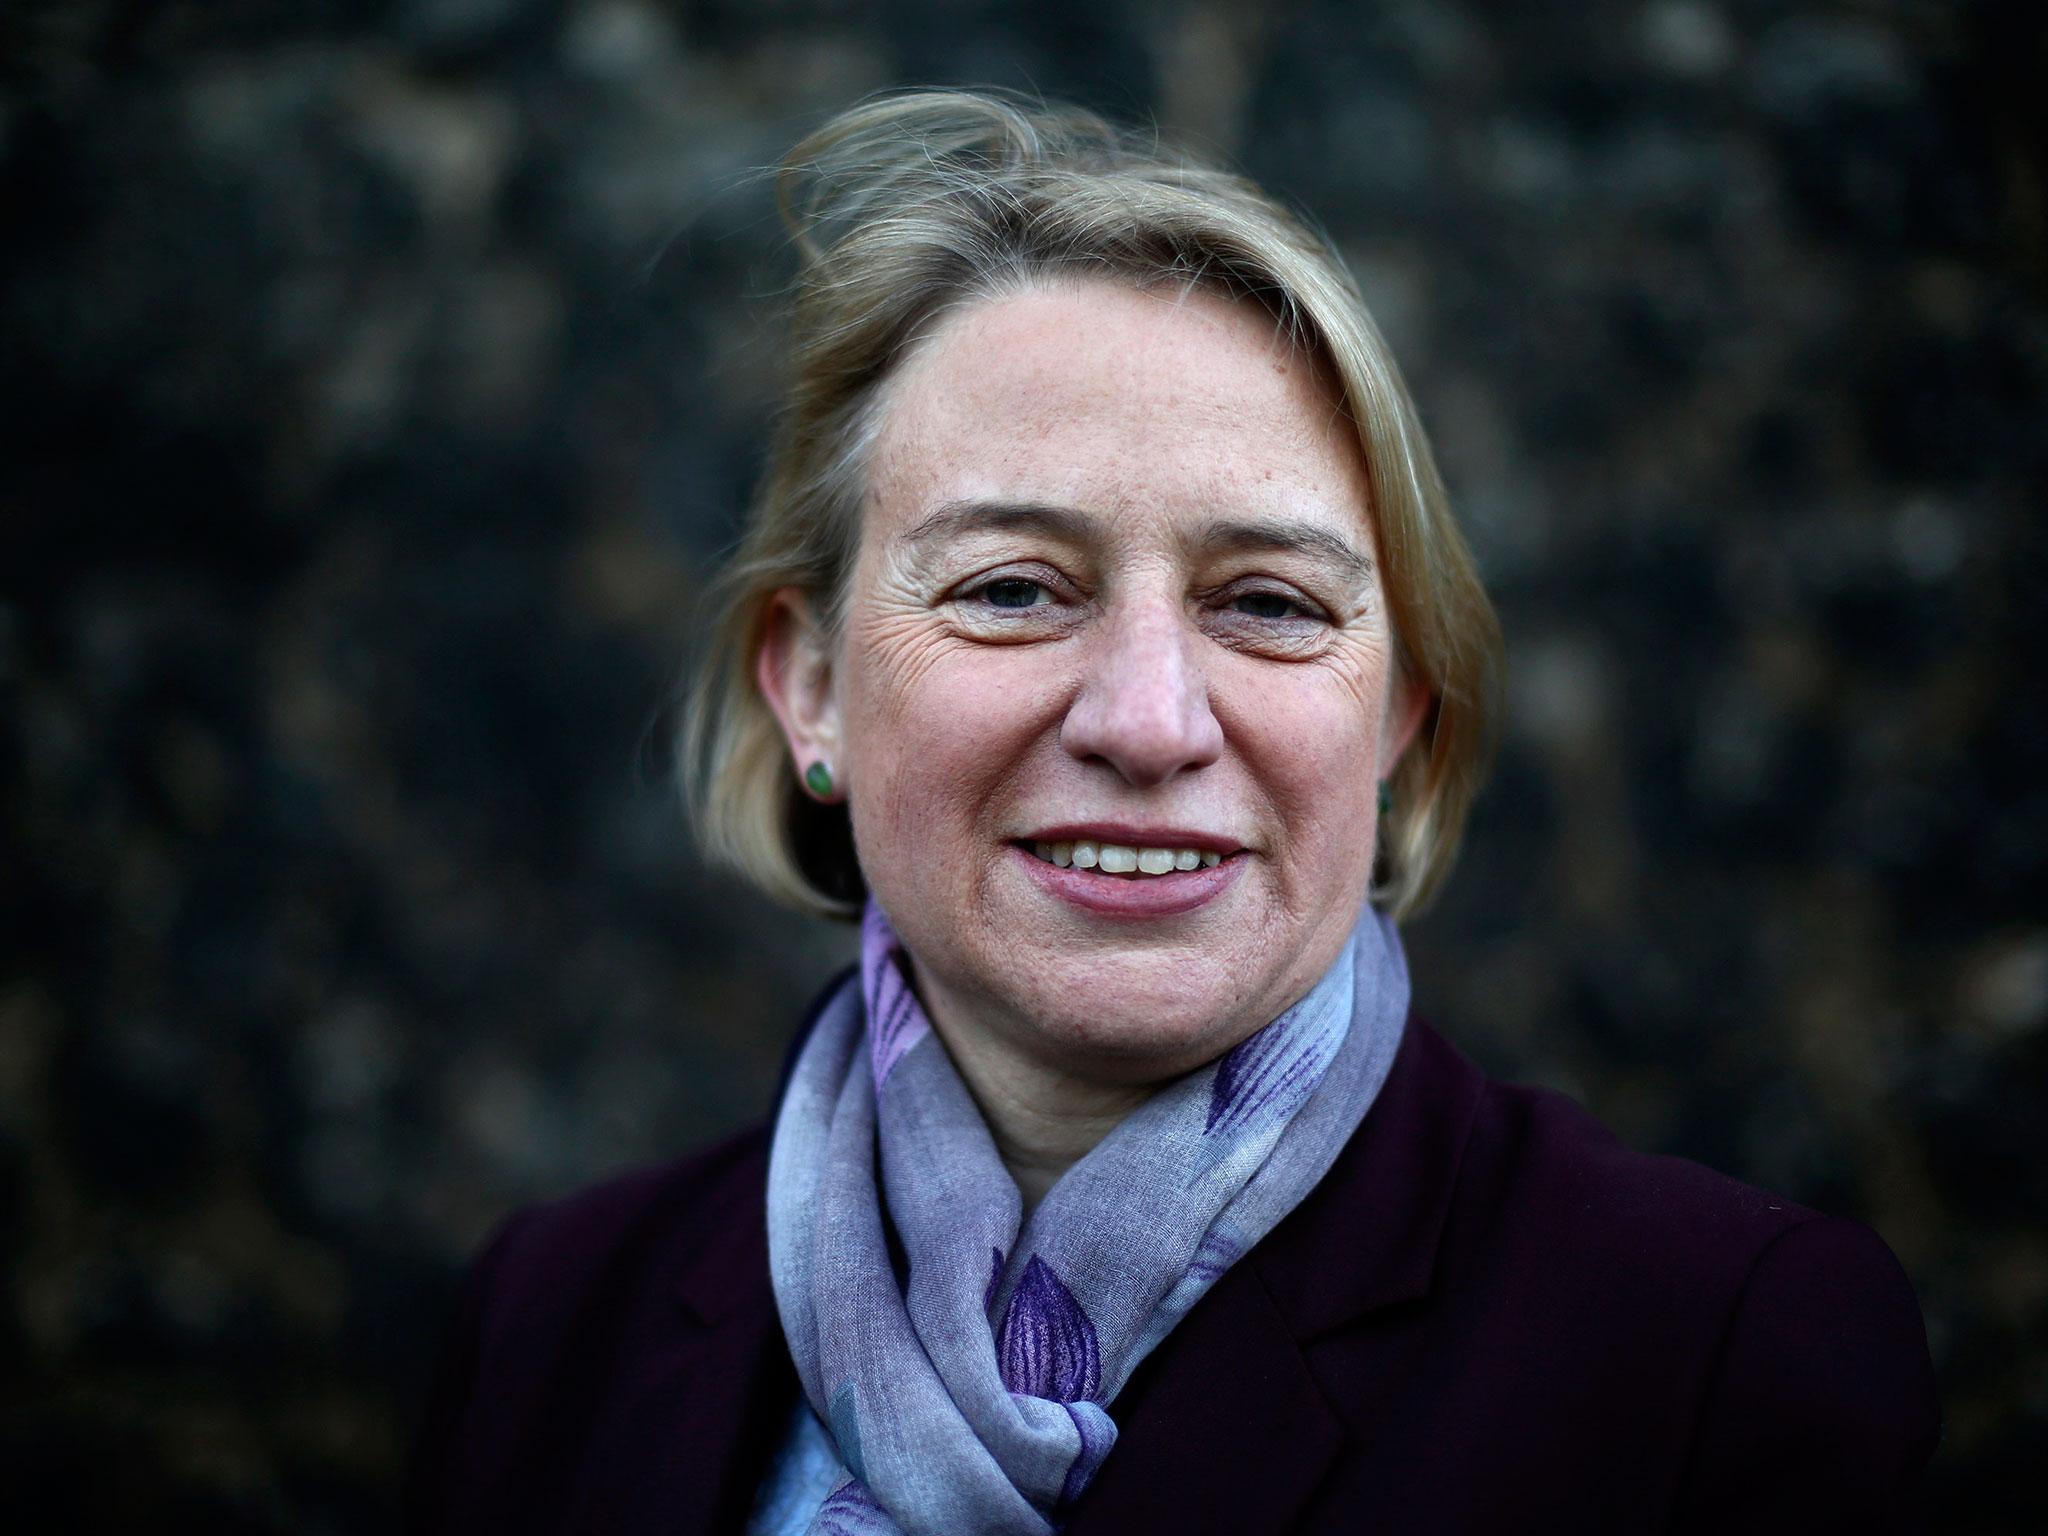 Natalie Bennett, the Green Party leader, has condemned the brutality of the Saudi Arabian regime